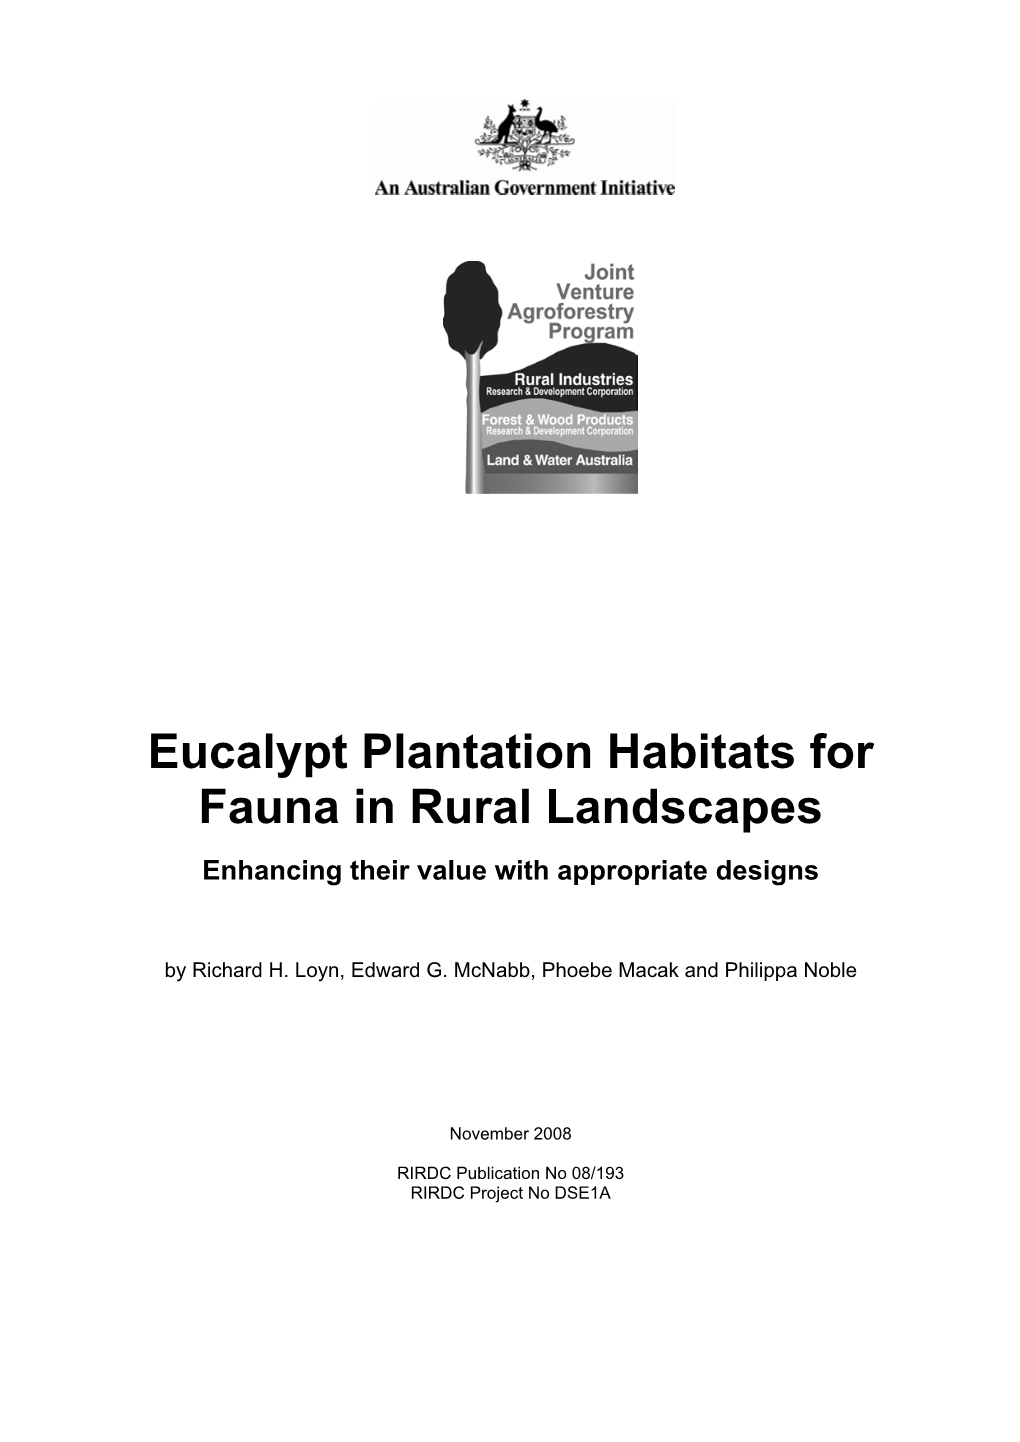 Eucalypt Plantation Habitats for Fauna in Rural Landscapes Enhancing Their Value with Appropriate Designs